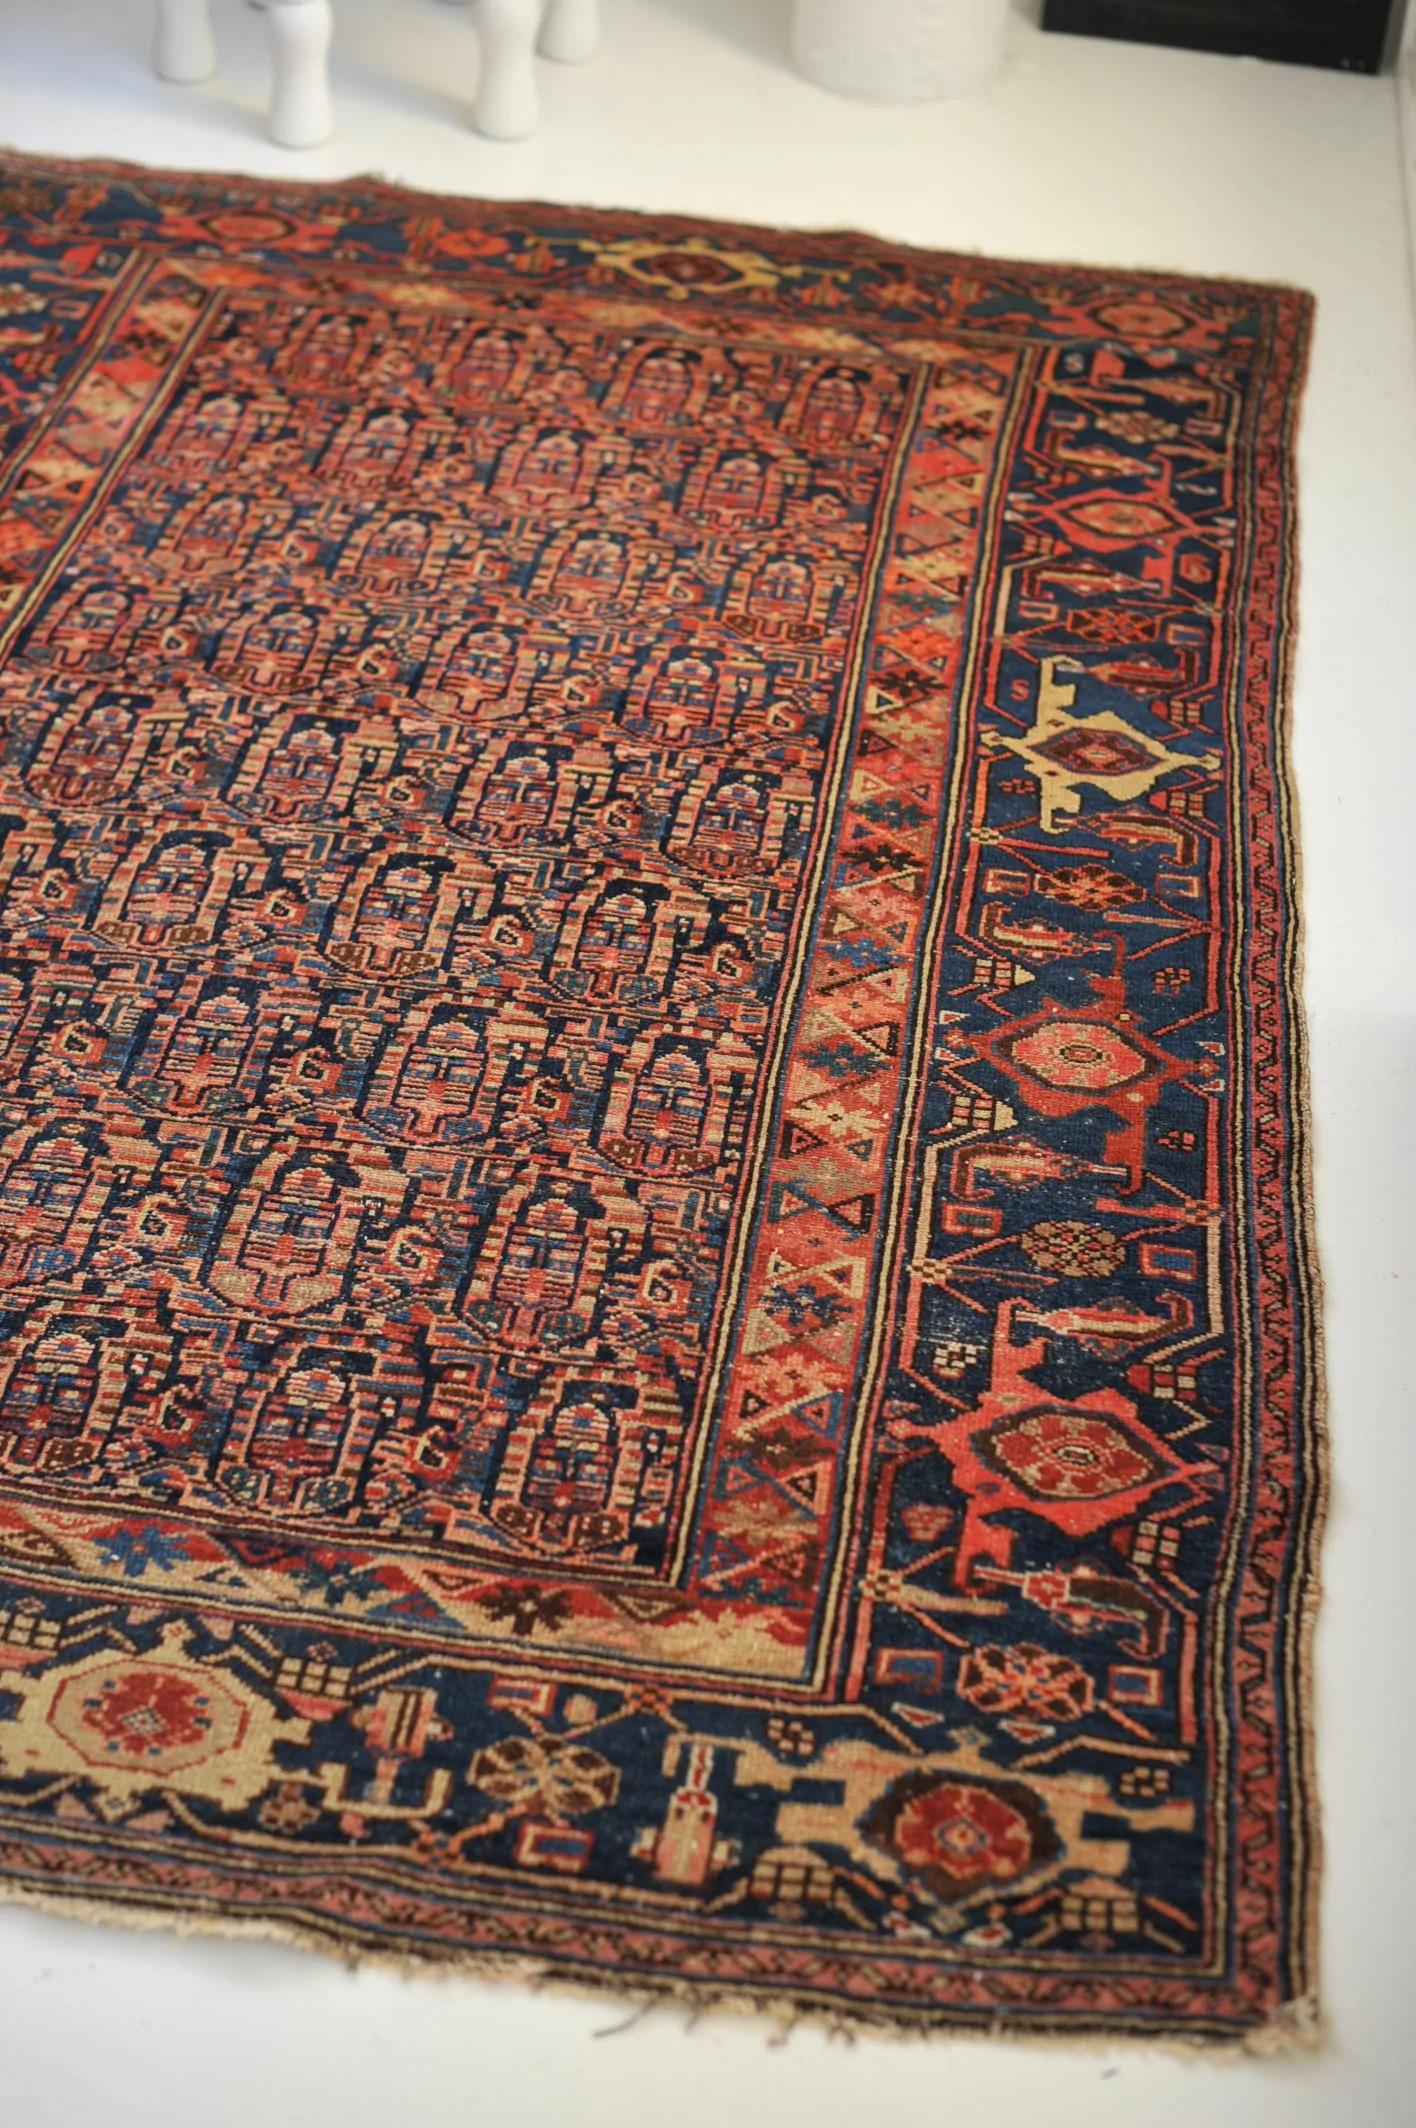 Joyous Mother- Daughter Boteh Village Antique Rug

About: When you think of old village rugs woven in remote lands - you think of women working on this mystical art while watching their kids as the men are also hard at work farming, in the markets,